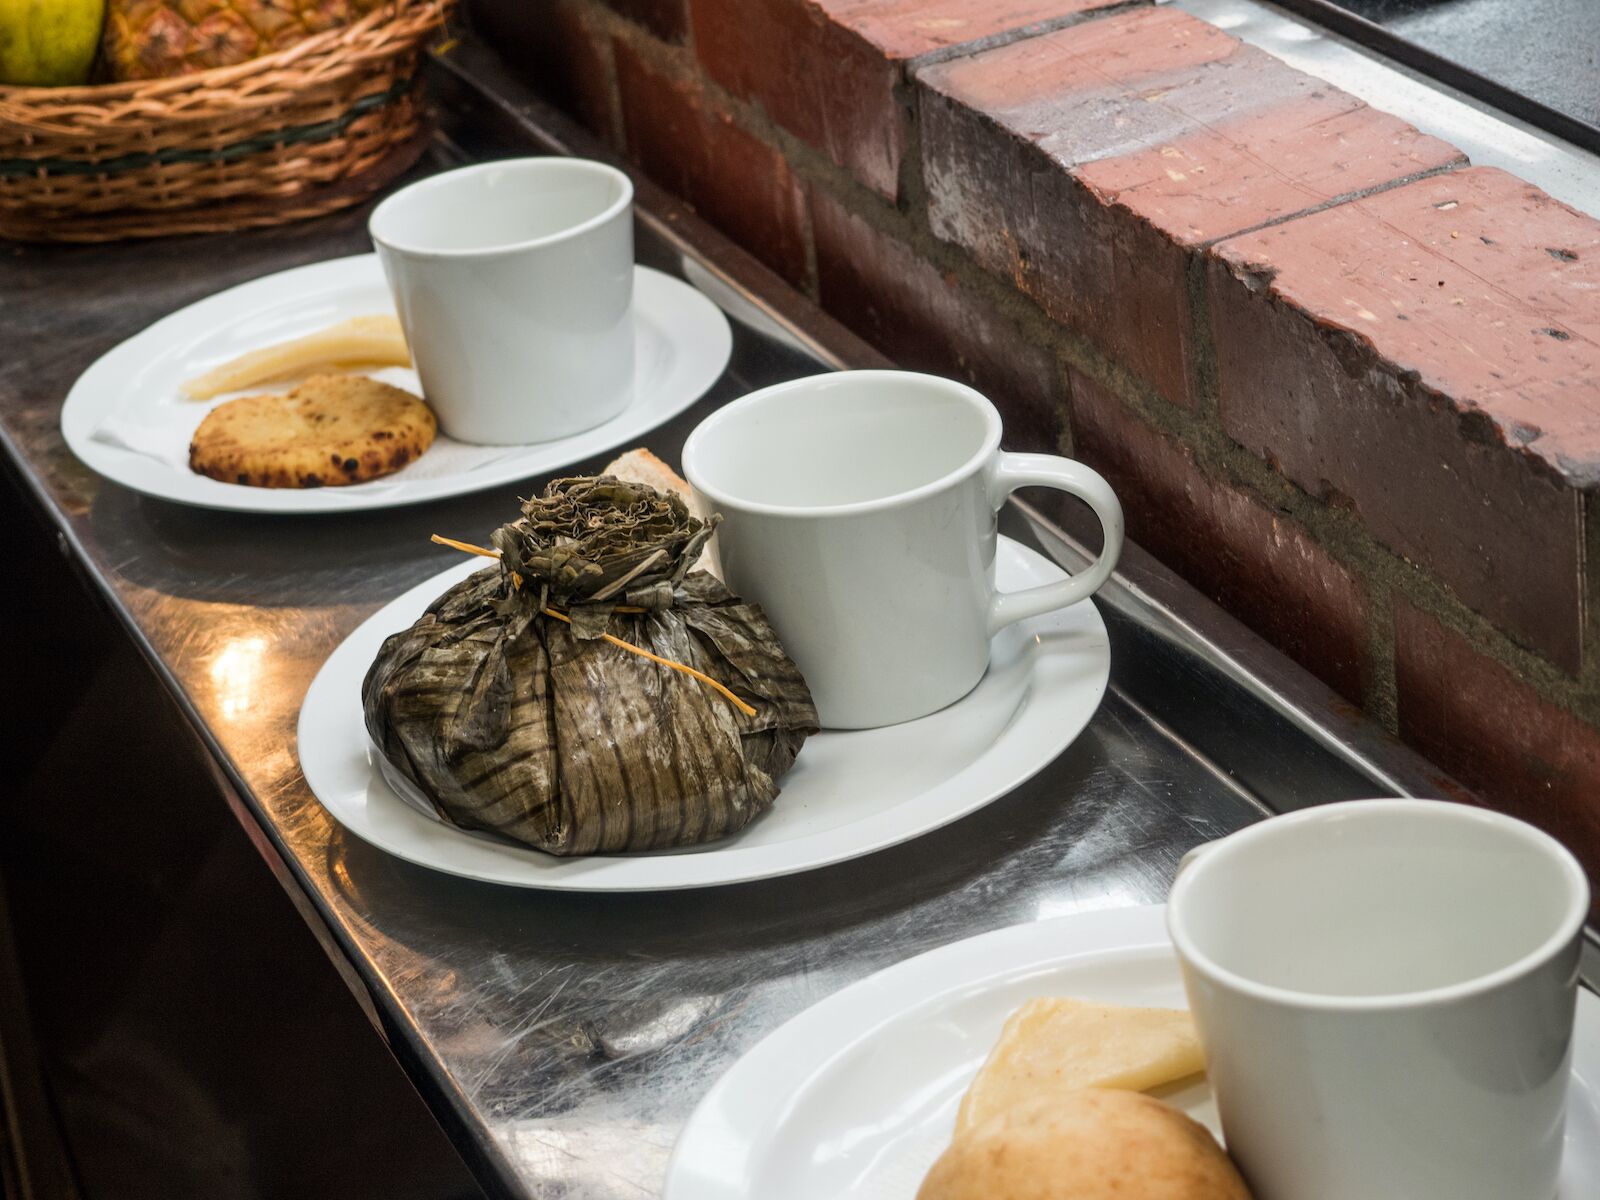 A common Colombian breakfast food is a tamal wrapped in a plaintain leaf served wtih a cup of a coffee